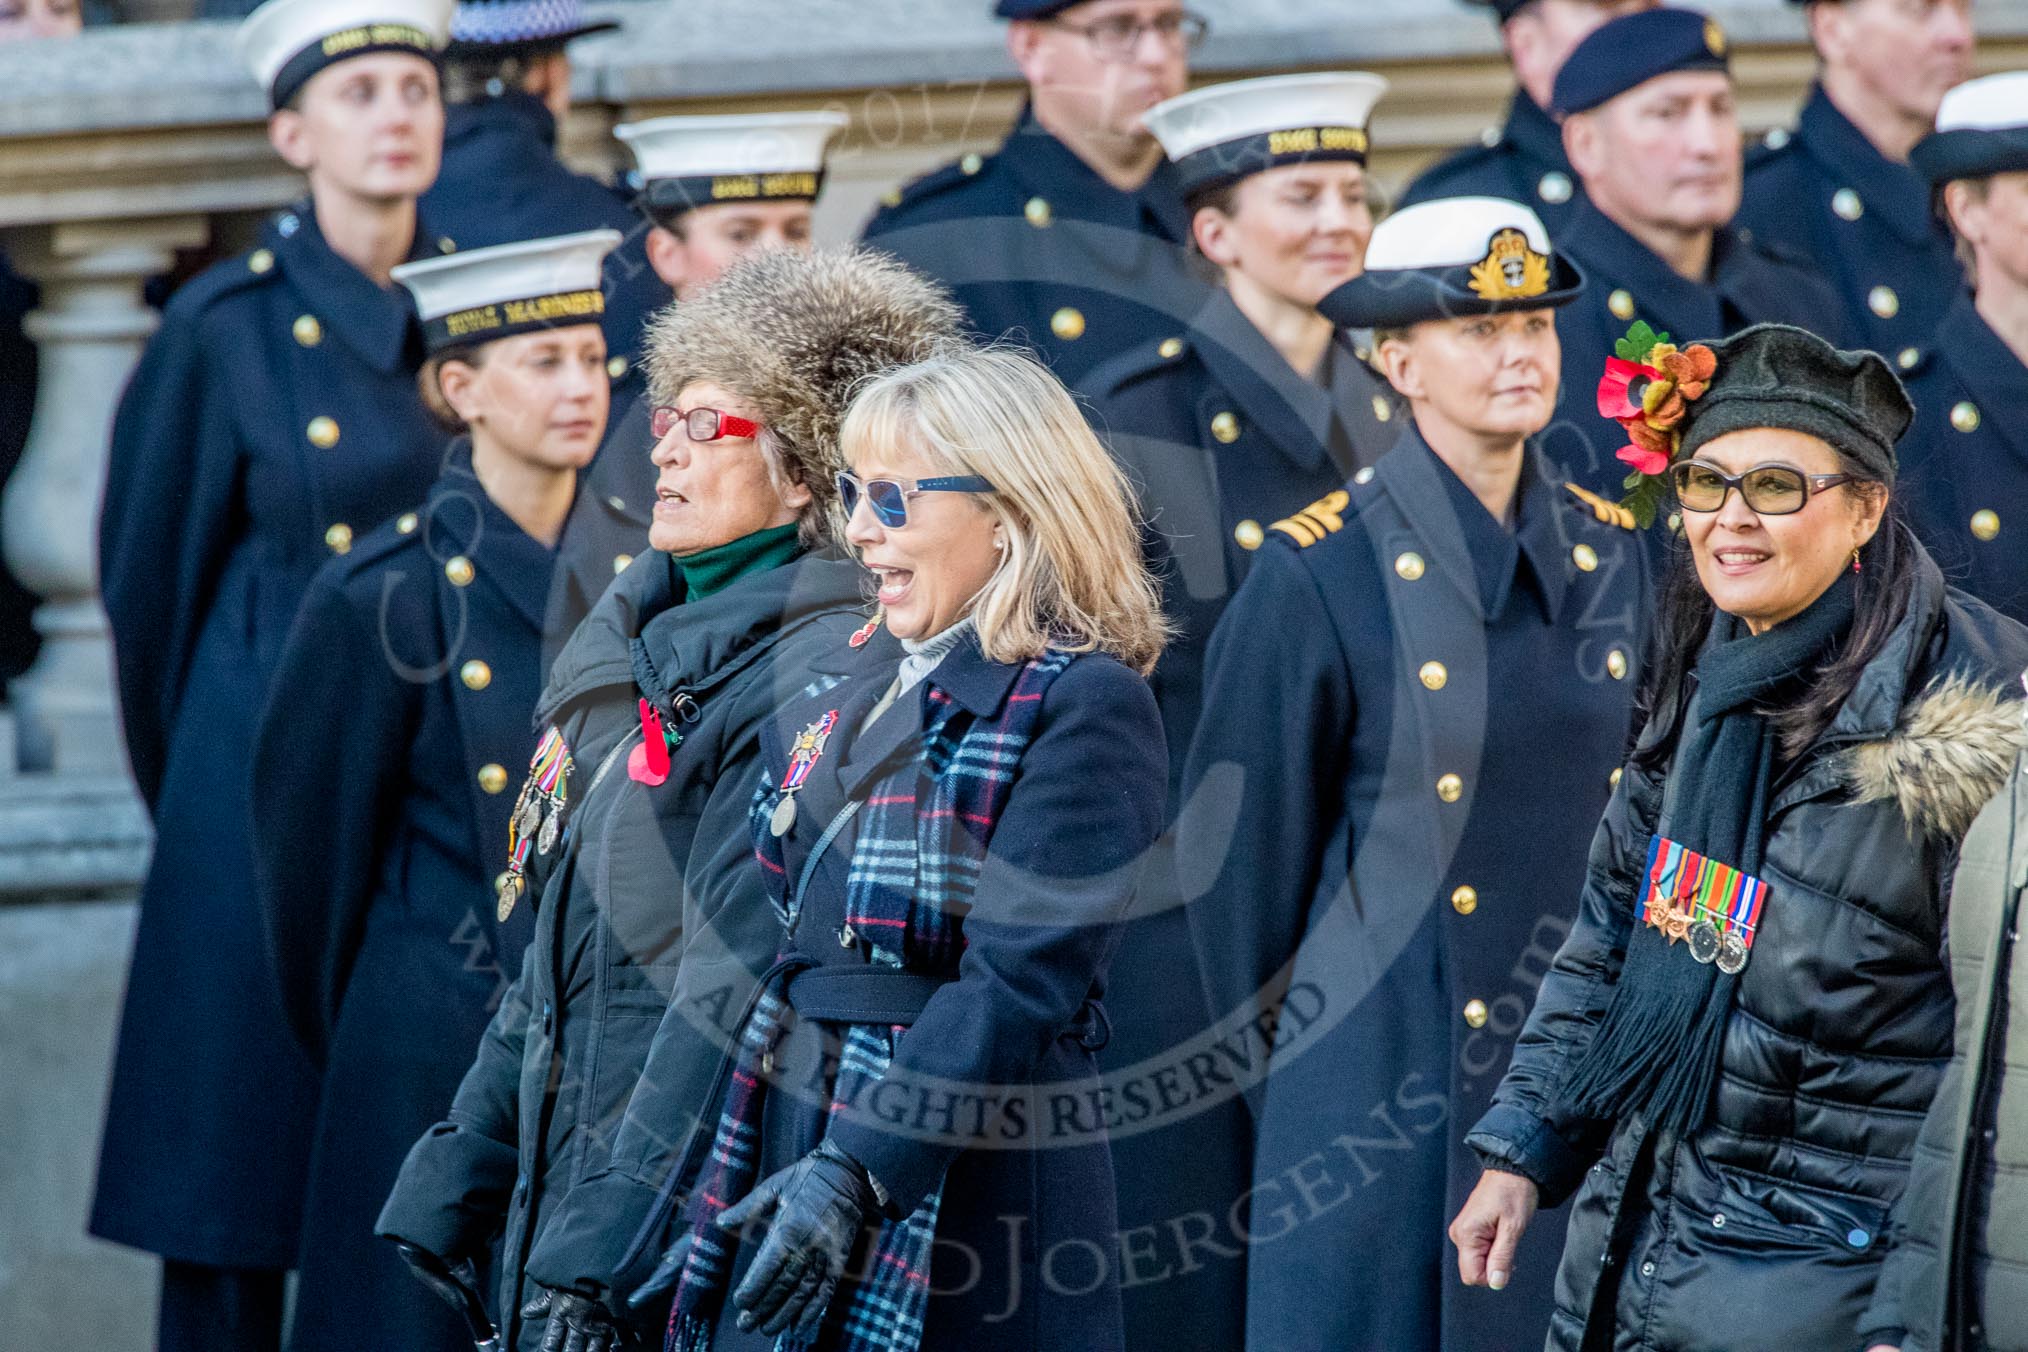 Equity (Group M33, 10 members) during the Royal British Legion March Past on Remembrance Sunday at the Cenotaph, Whitehall, Westminster, London, 11 November 2018, 12:28.